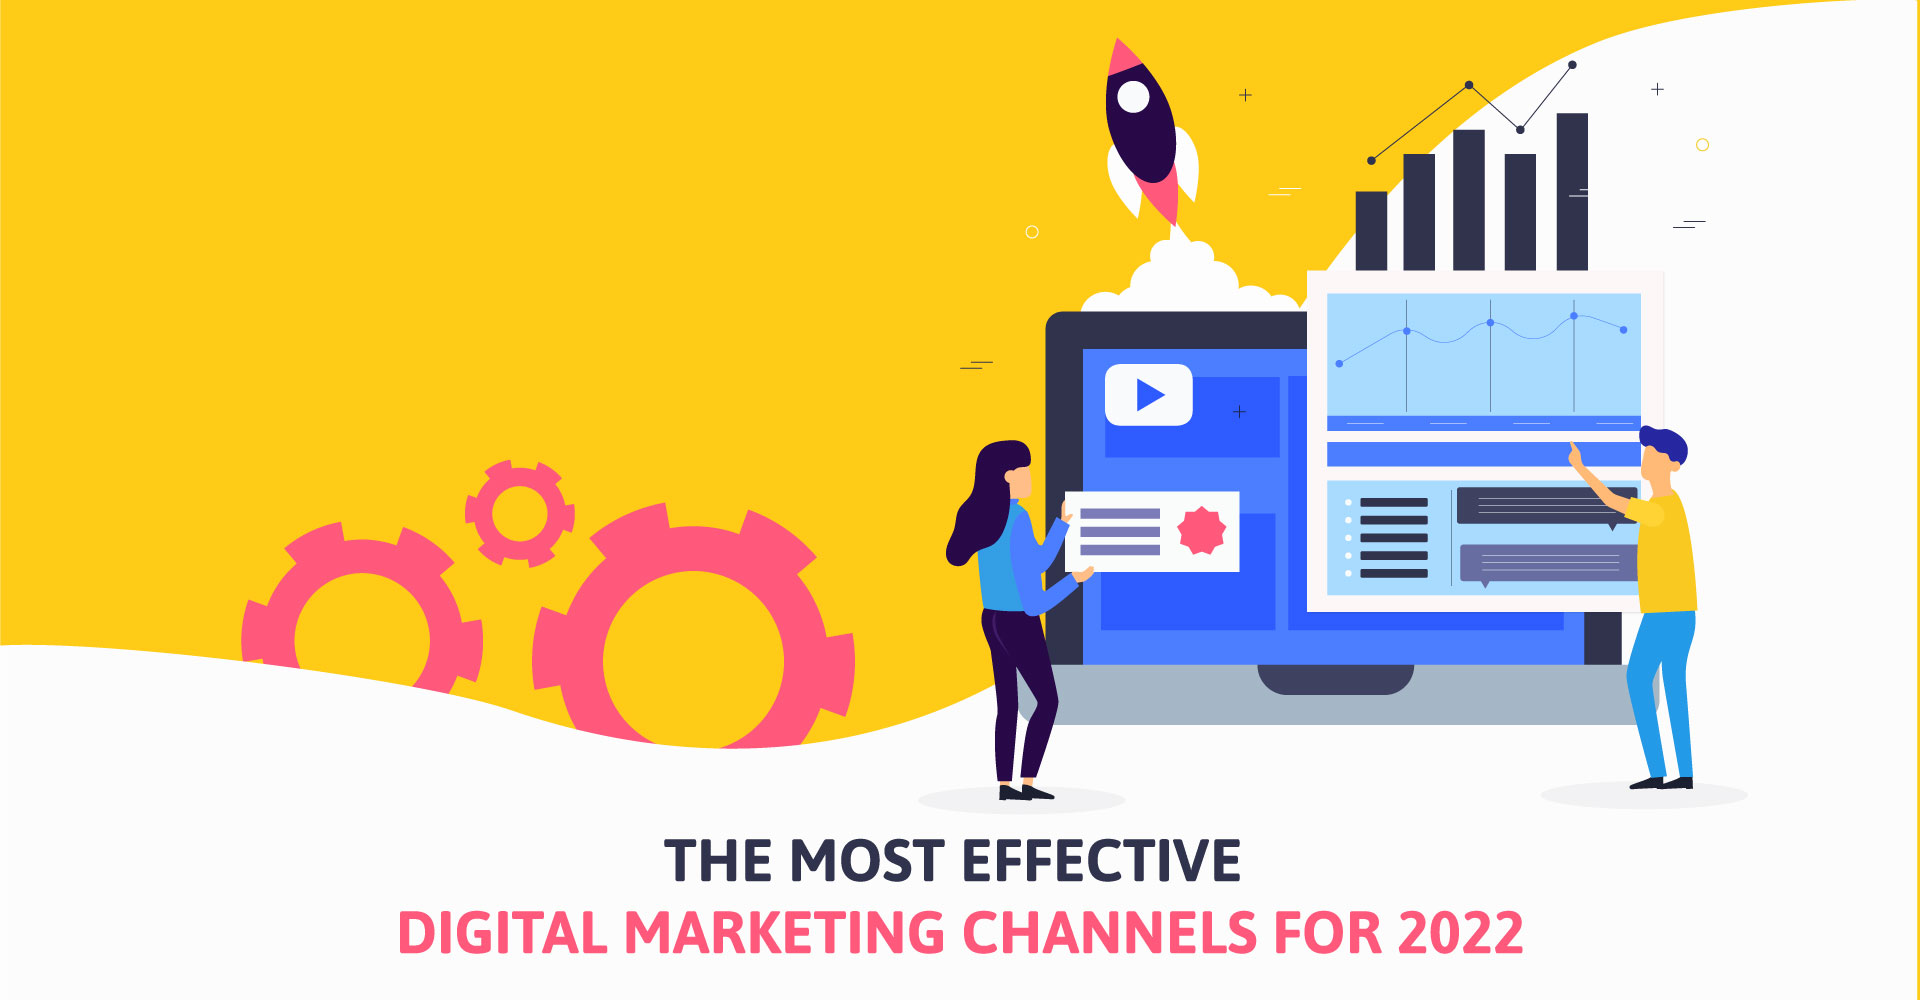 THE MOST EFFECTIVE
DIGITAL MARKETING CHANNELS FOR 2022